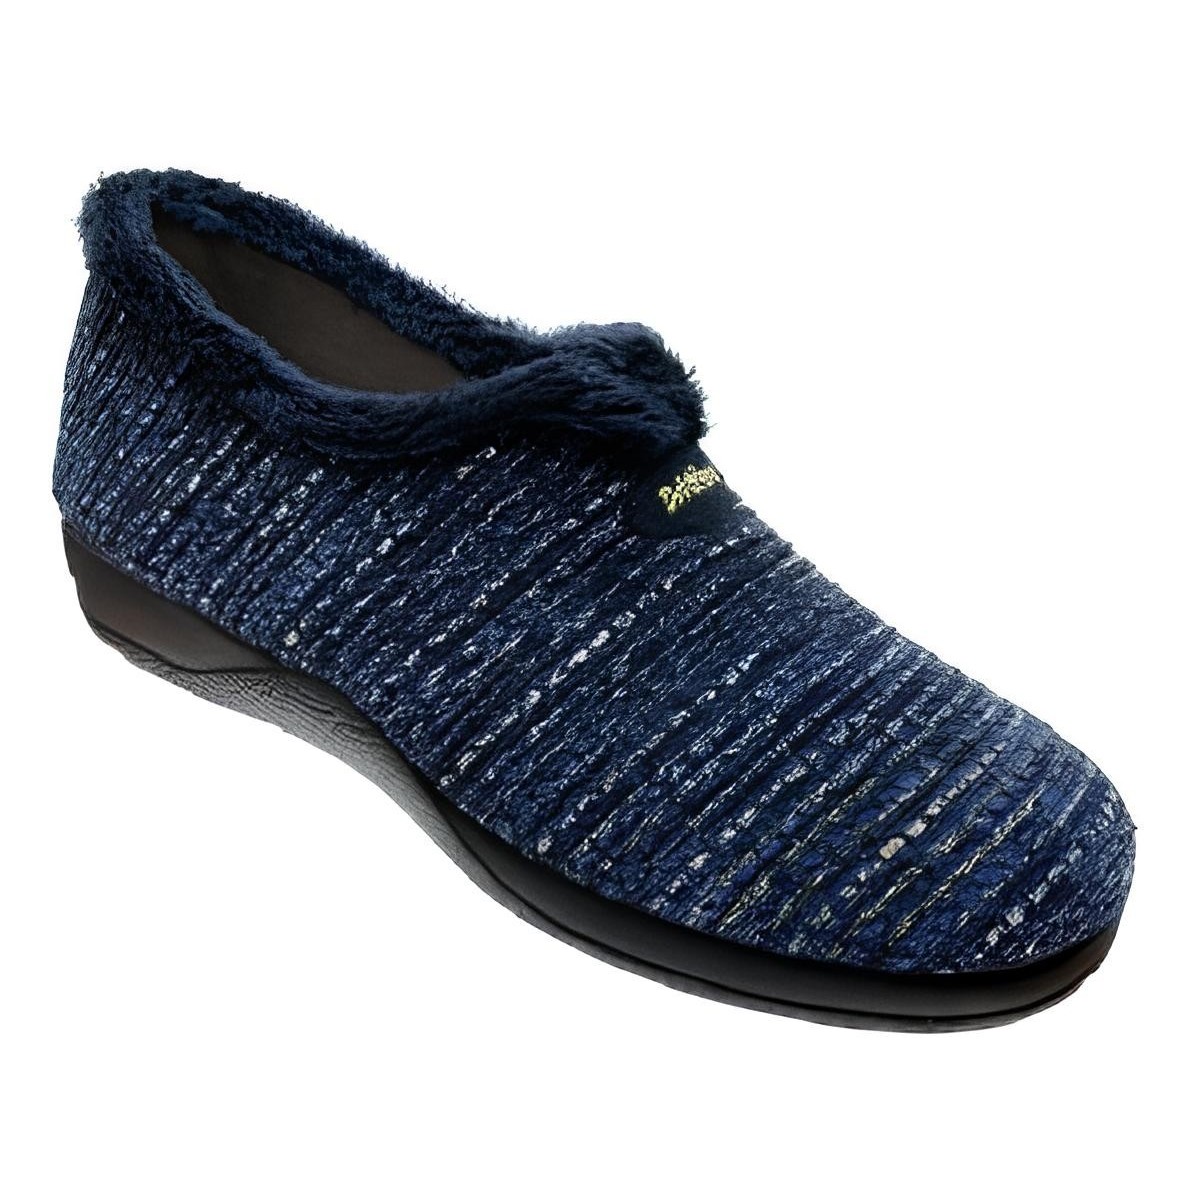 Blue House Slippers by CBP Home